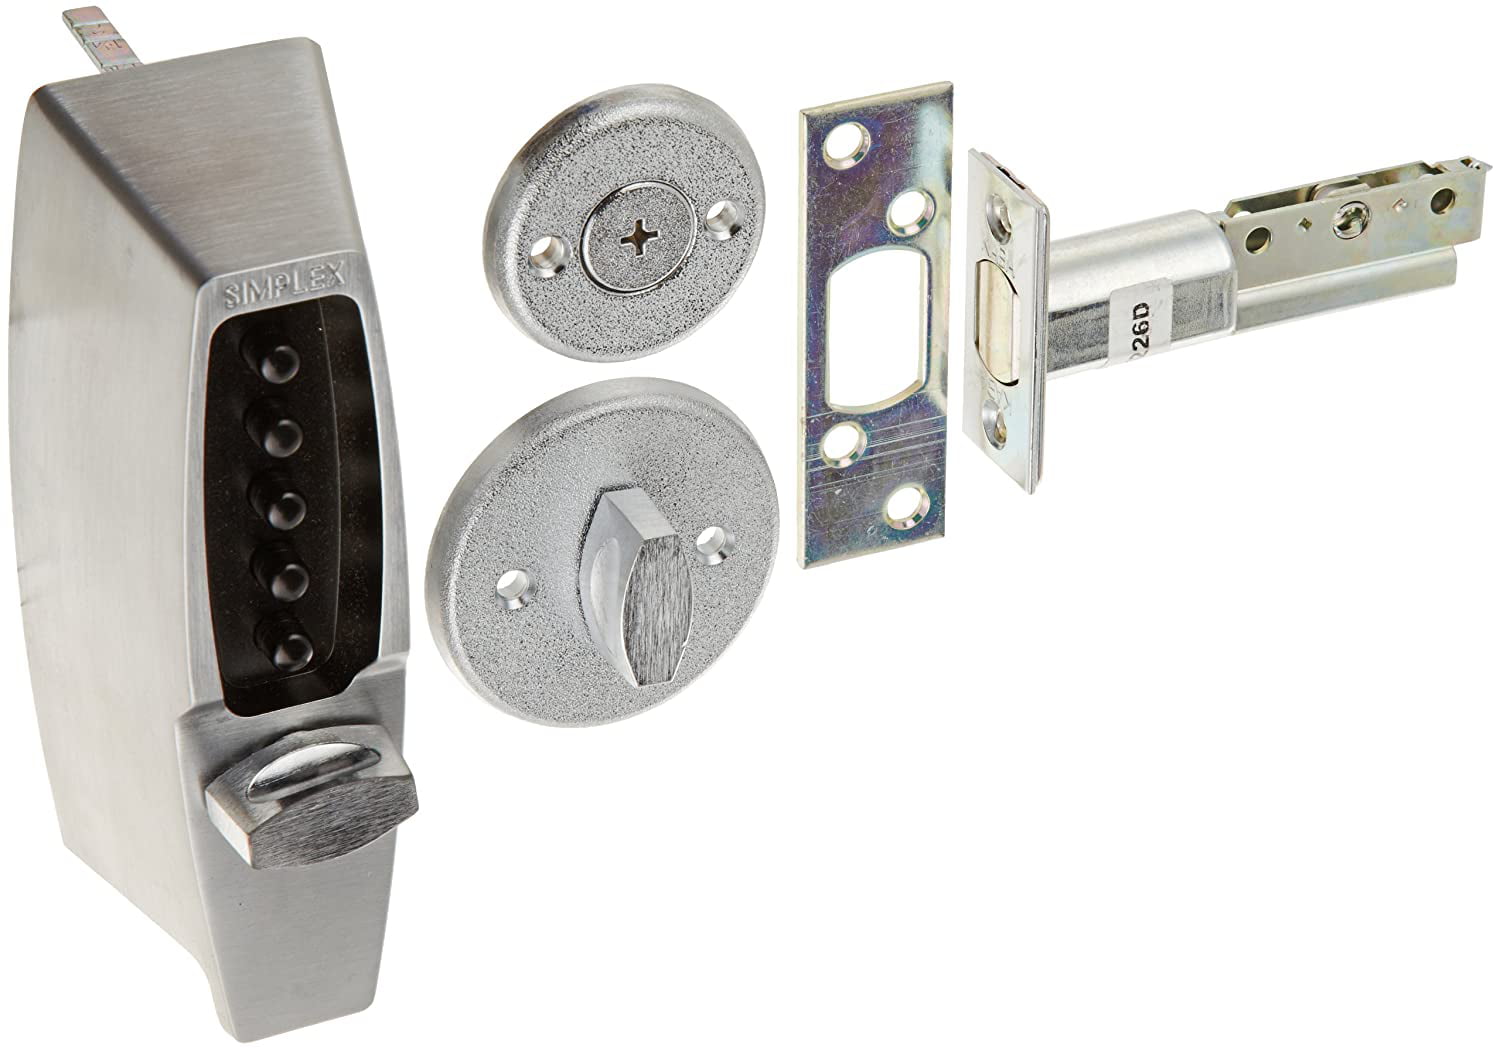 Kaba 7108-03-41 Auxiliary Pushbutton Lock Thumbturn & Deadbolt Us3 Brass for sale online 